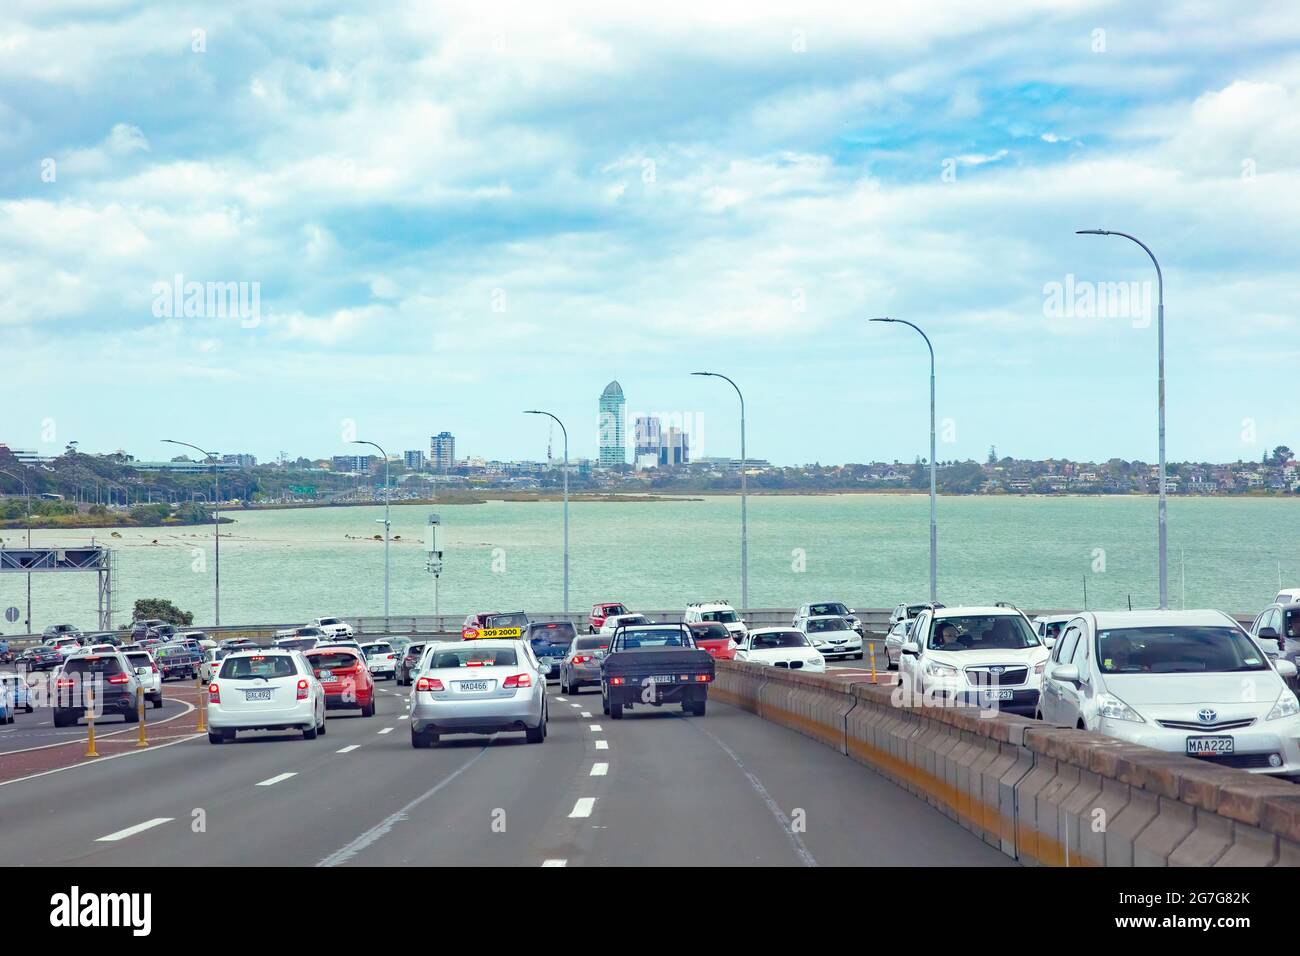 Auckland cbd with Sky Tower view taken from Auckland Southern Motorway, New Zealand on December 9, 2019 Stock Photo